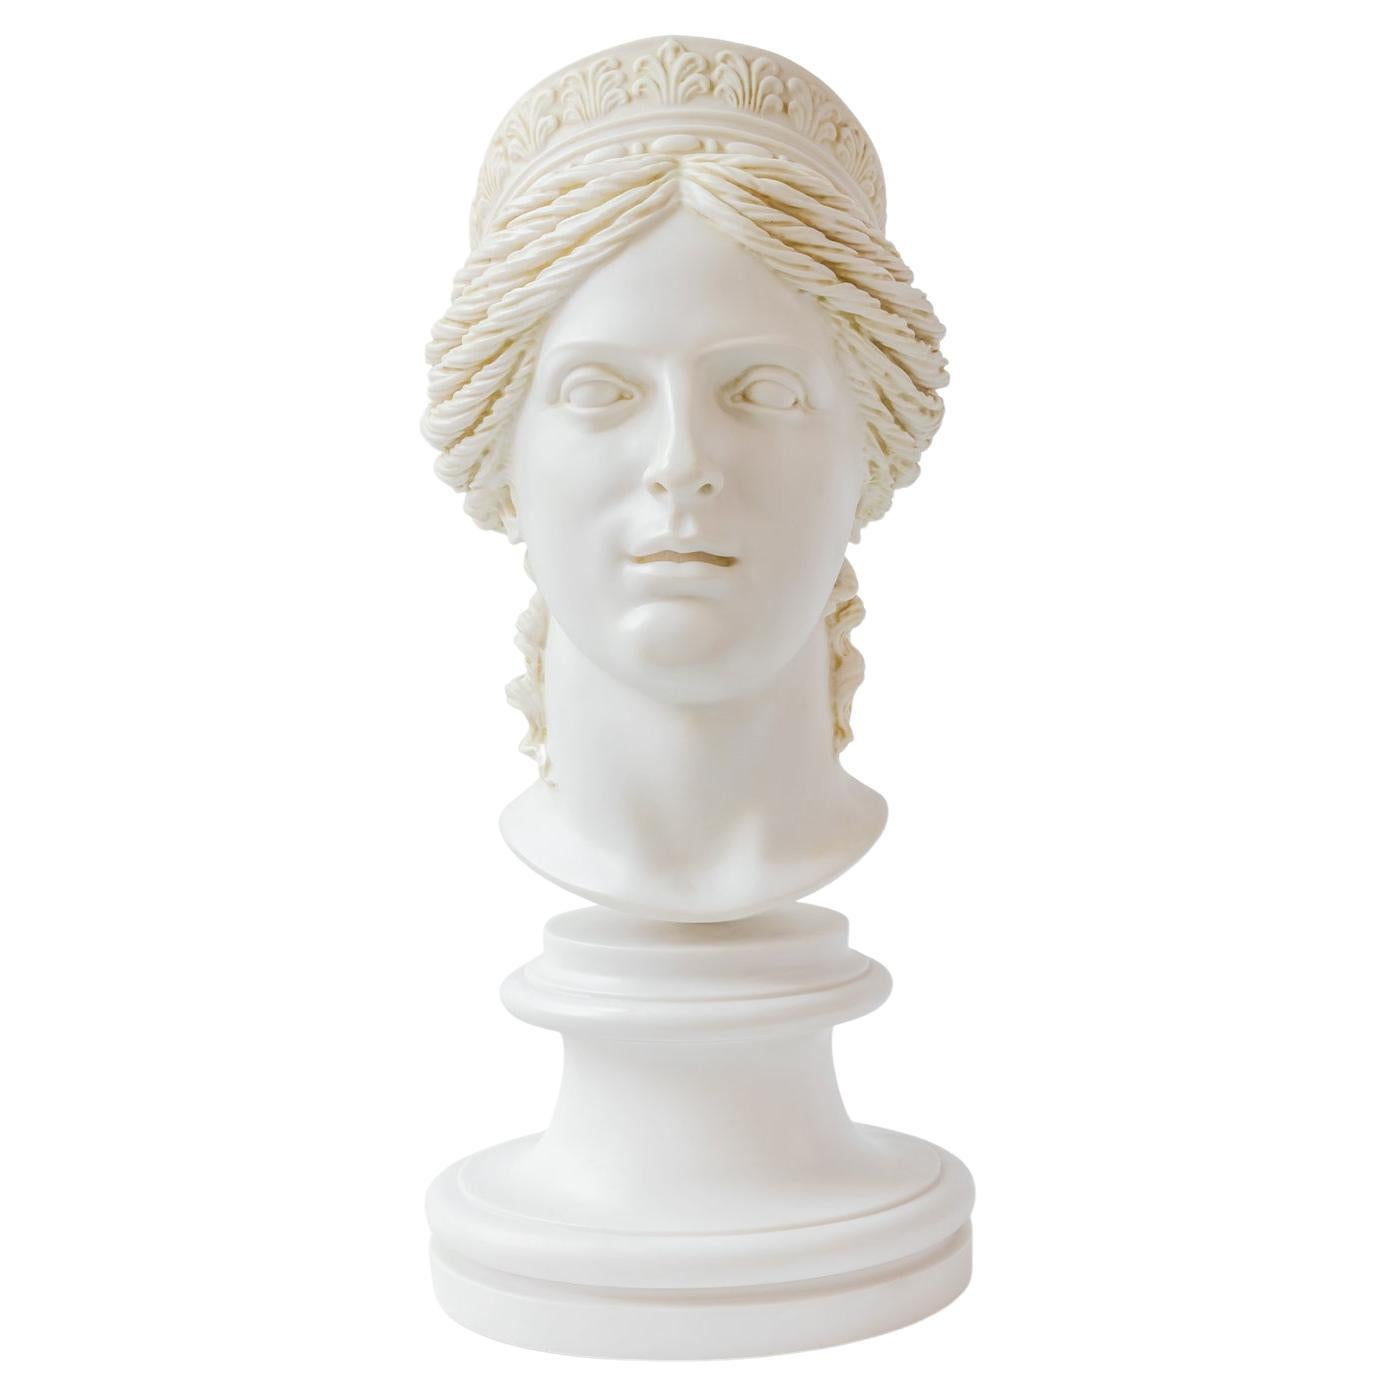 Marble Bust Of Ancient Women Greeks - 5 For Sale on 1stDibs